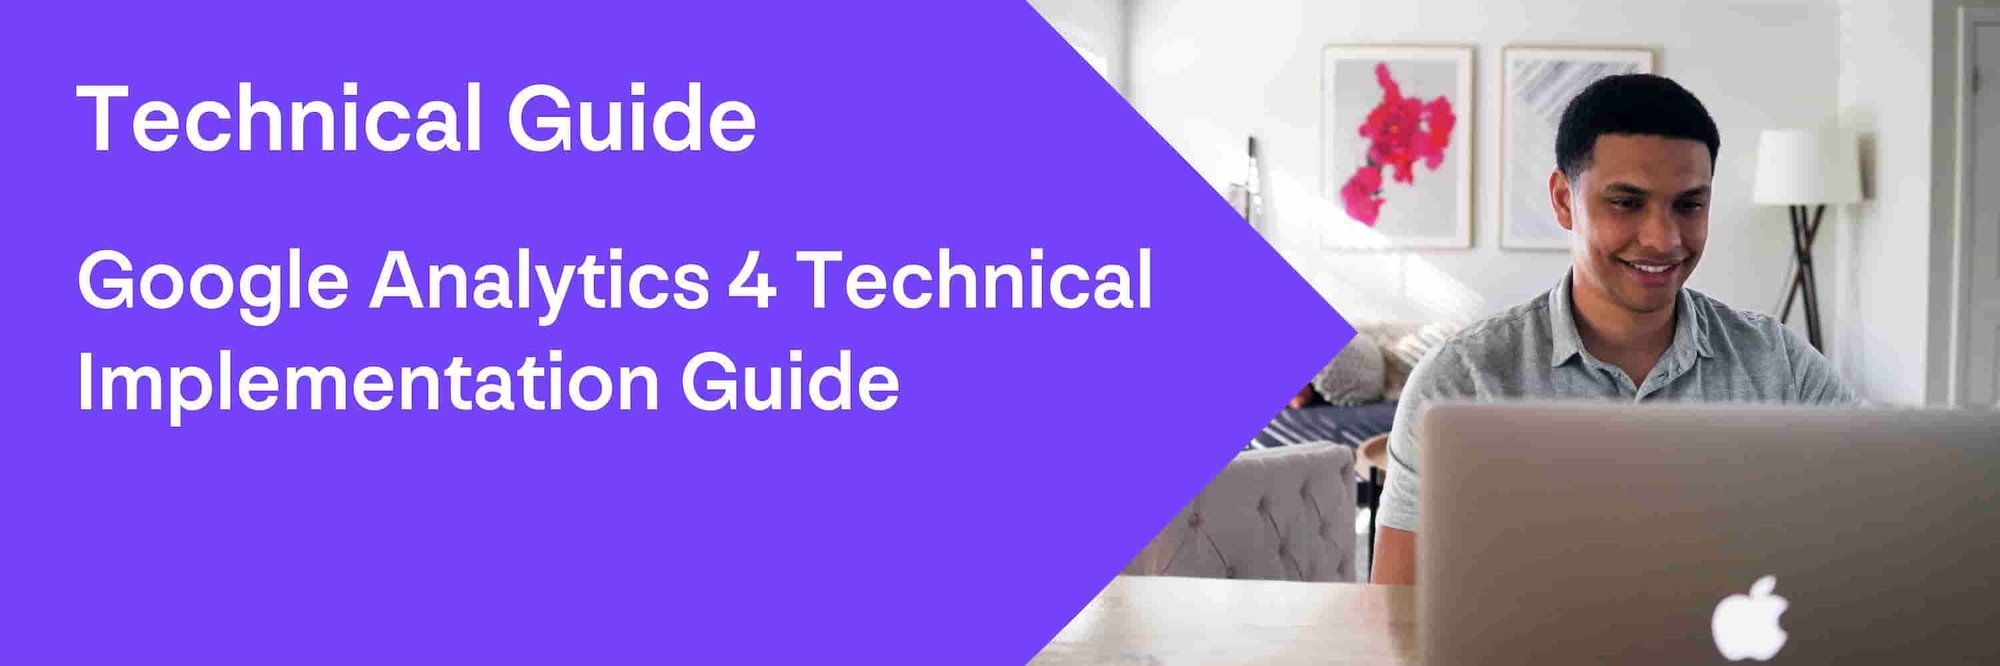 Google Analytics 4 Technical Implementation Guide